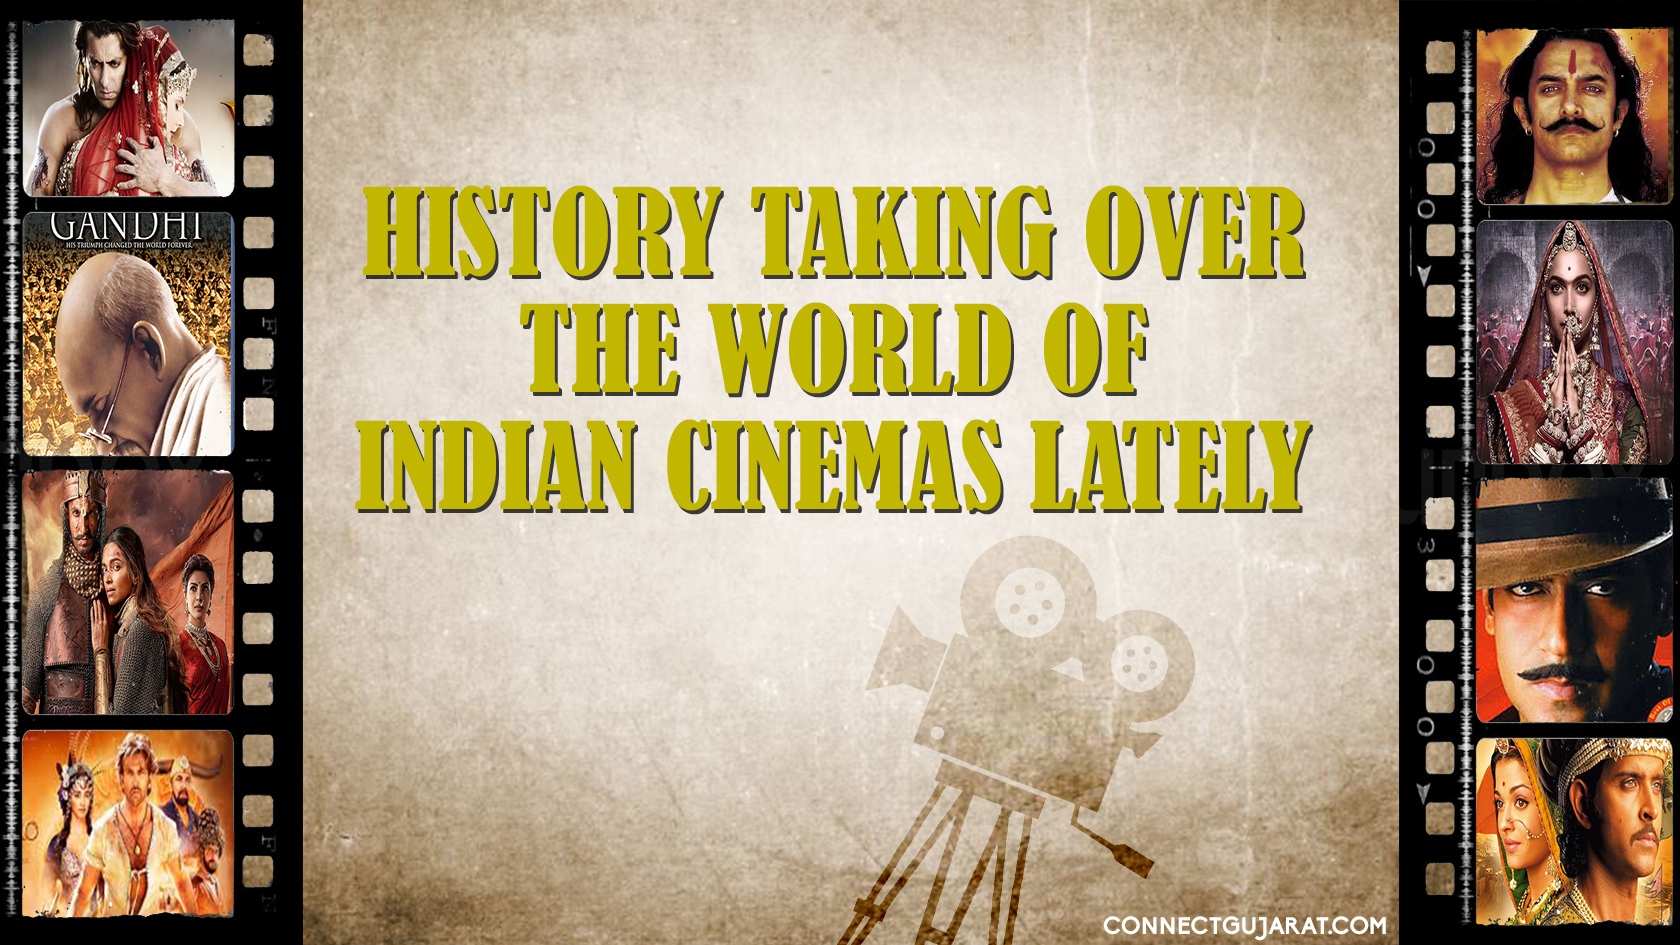 History taking over the world of Indian Cinemas lately